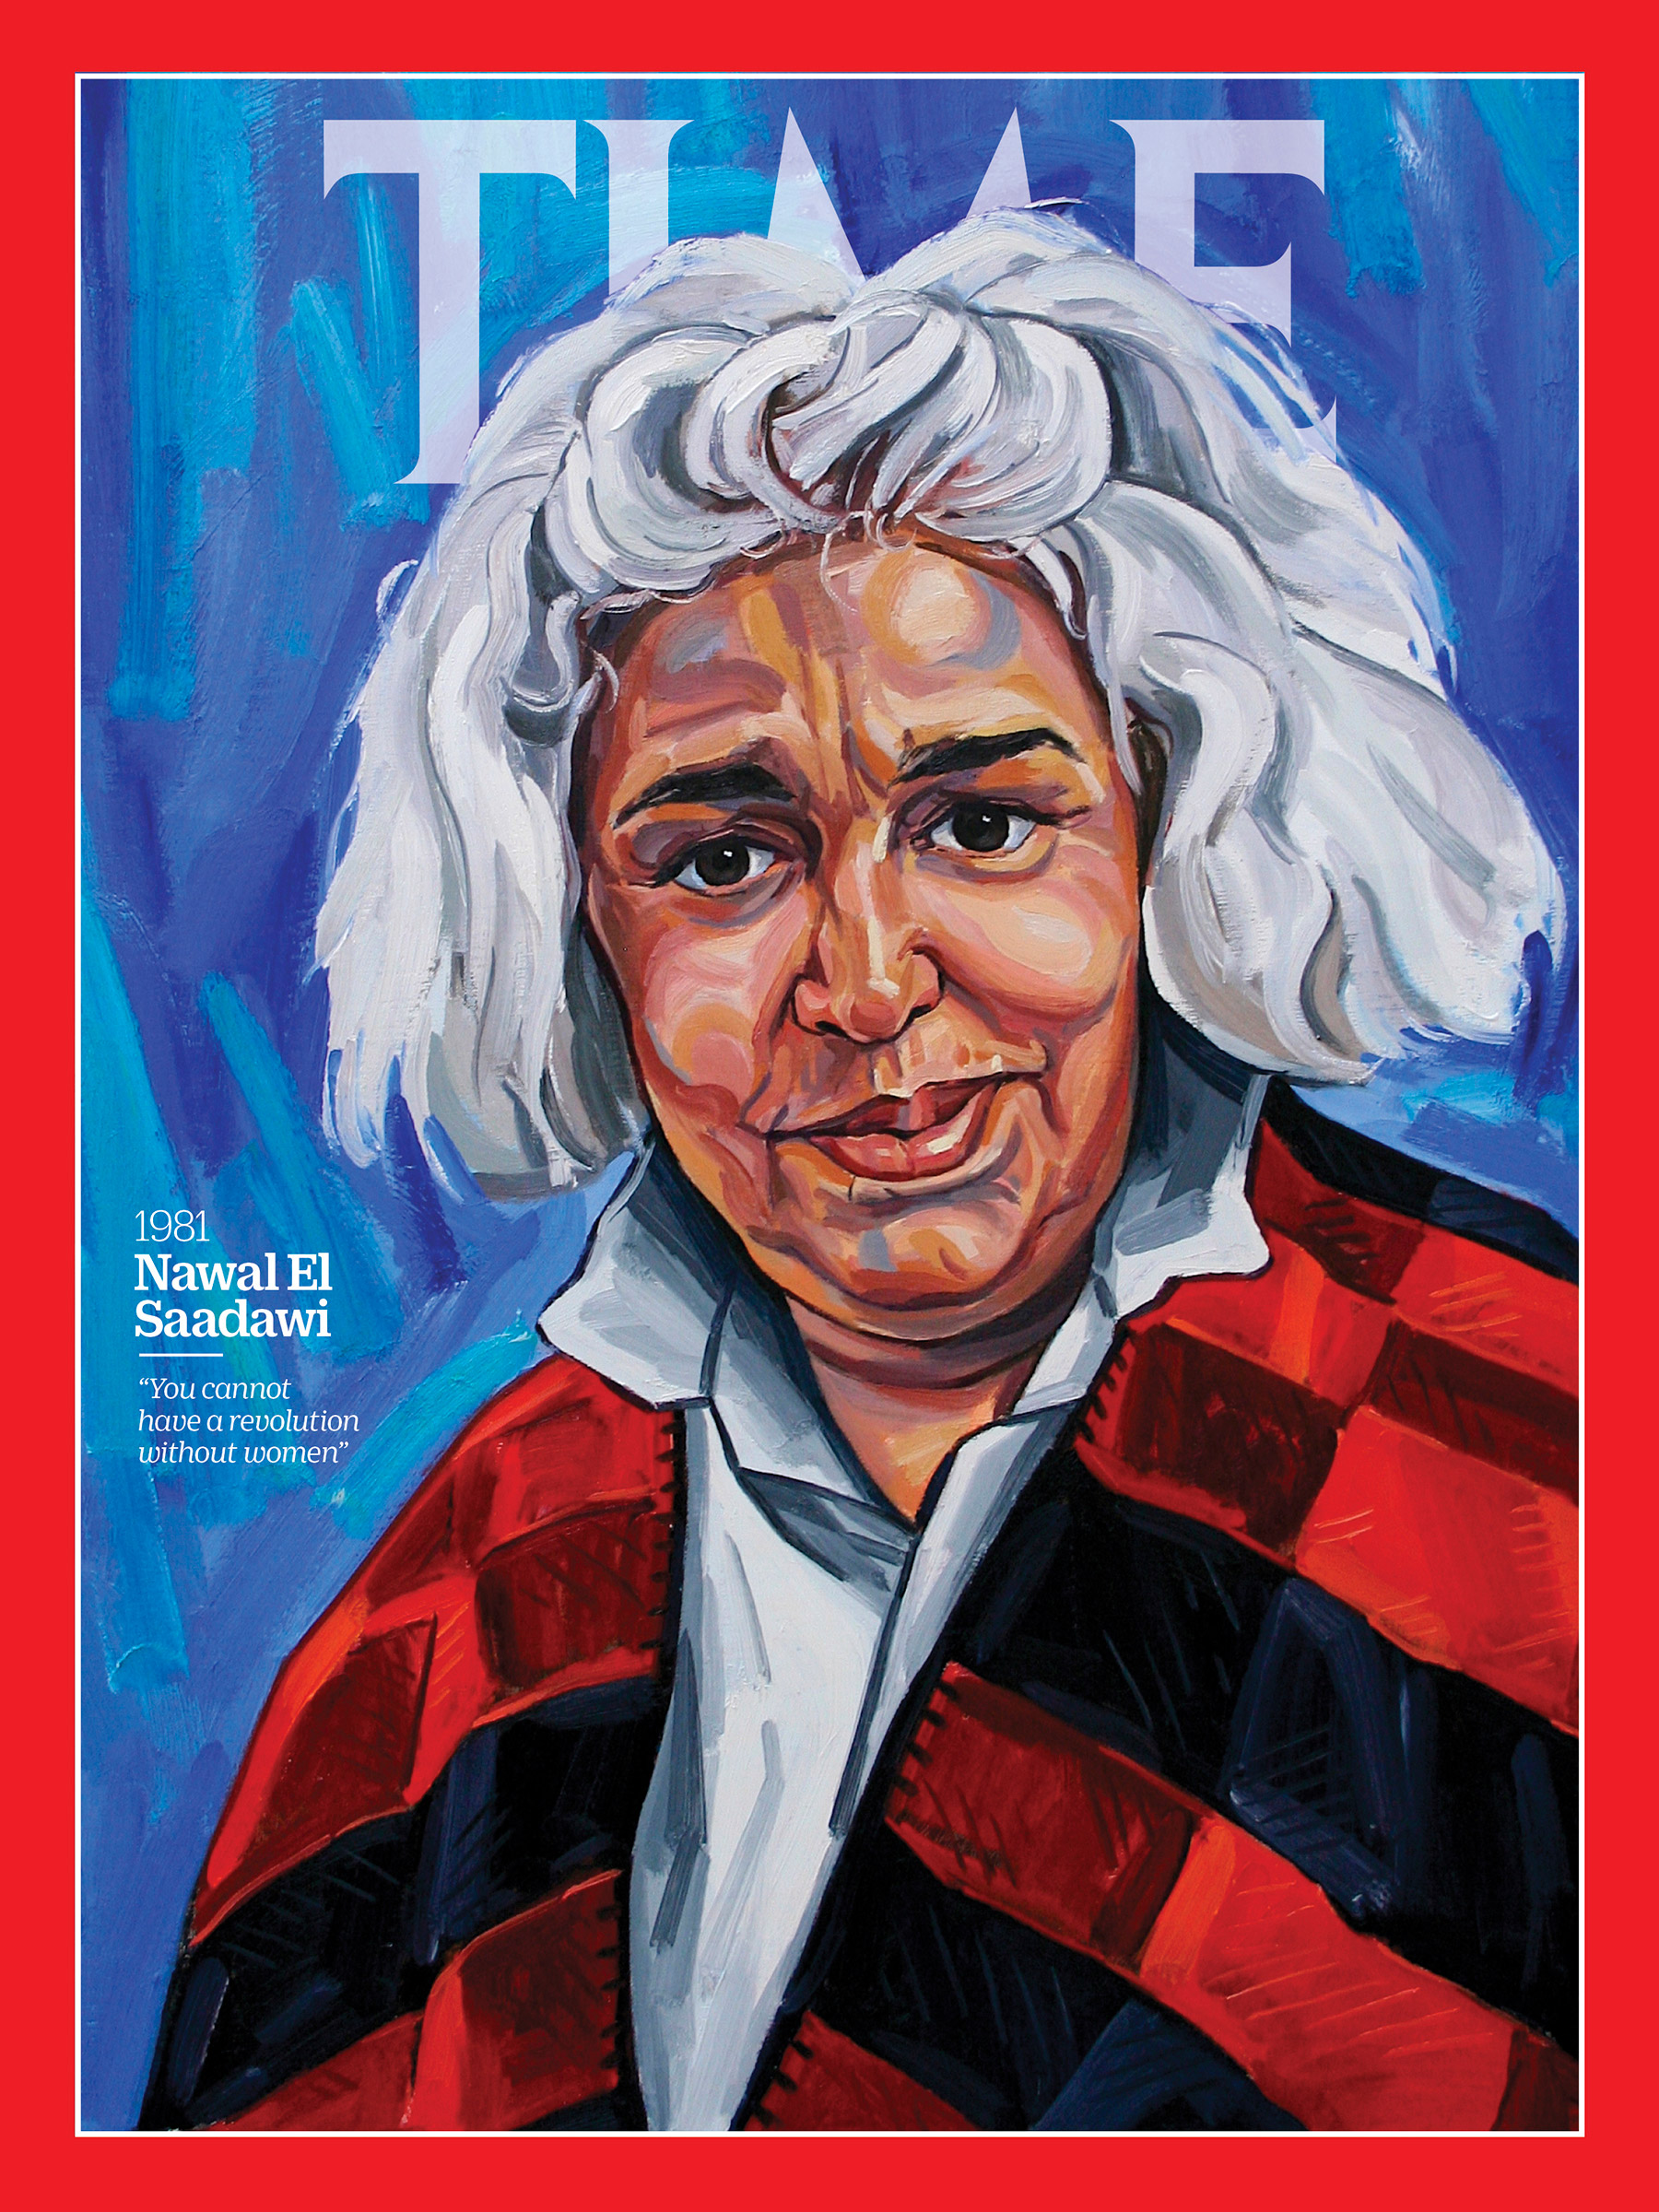 <a href="https://fineartamerica.com/featured/nawal-el-saadawi-1981-time.html"><strong>Buy the cover art→</strong></a> (Portrait by Sarah Jane Moon for TIME; Sueddeutsche Zeitung Photo/Alamy)